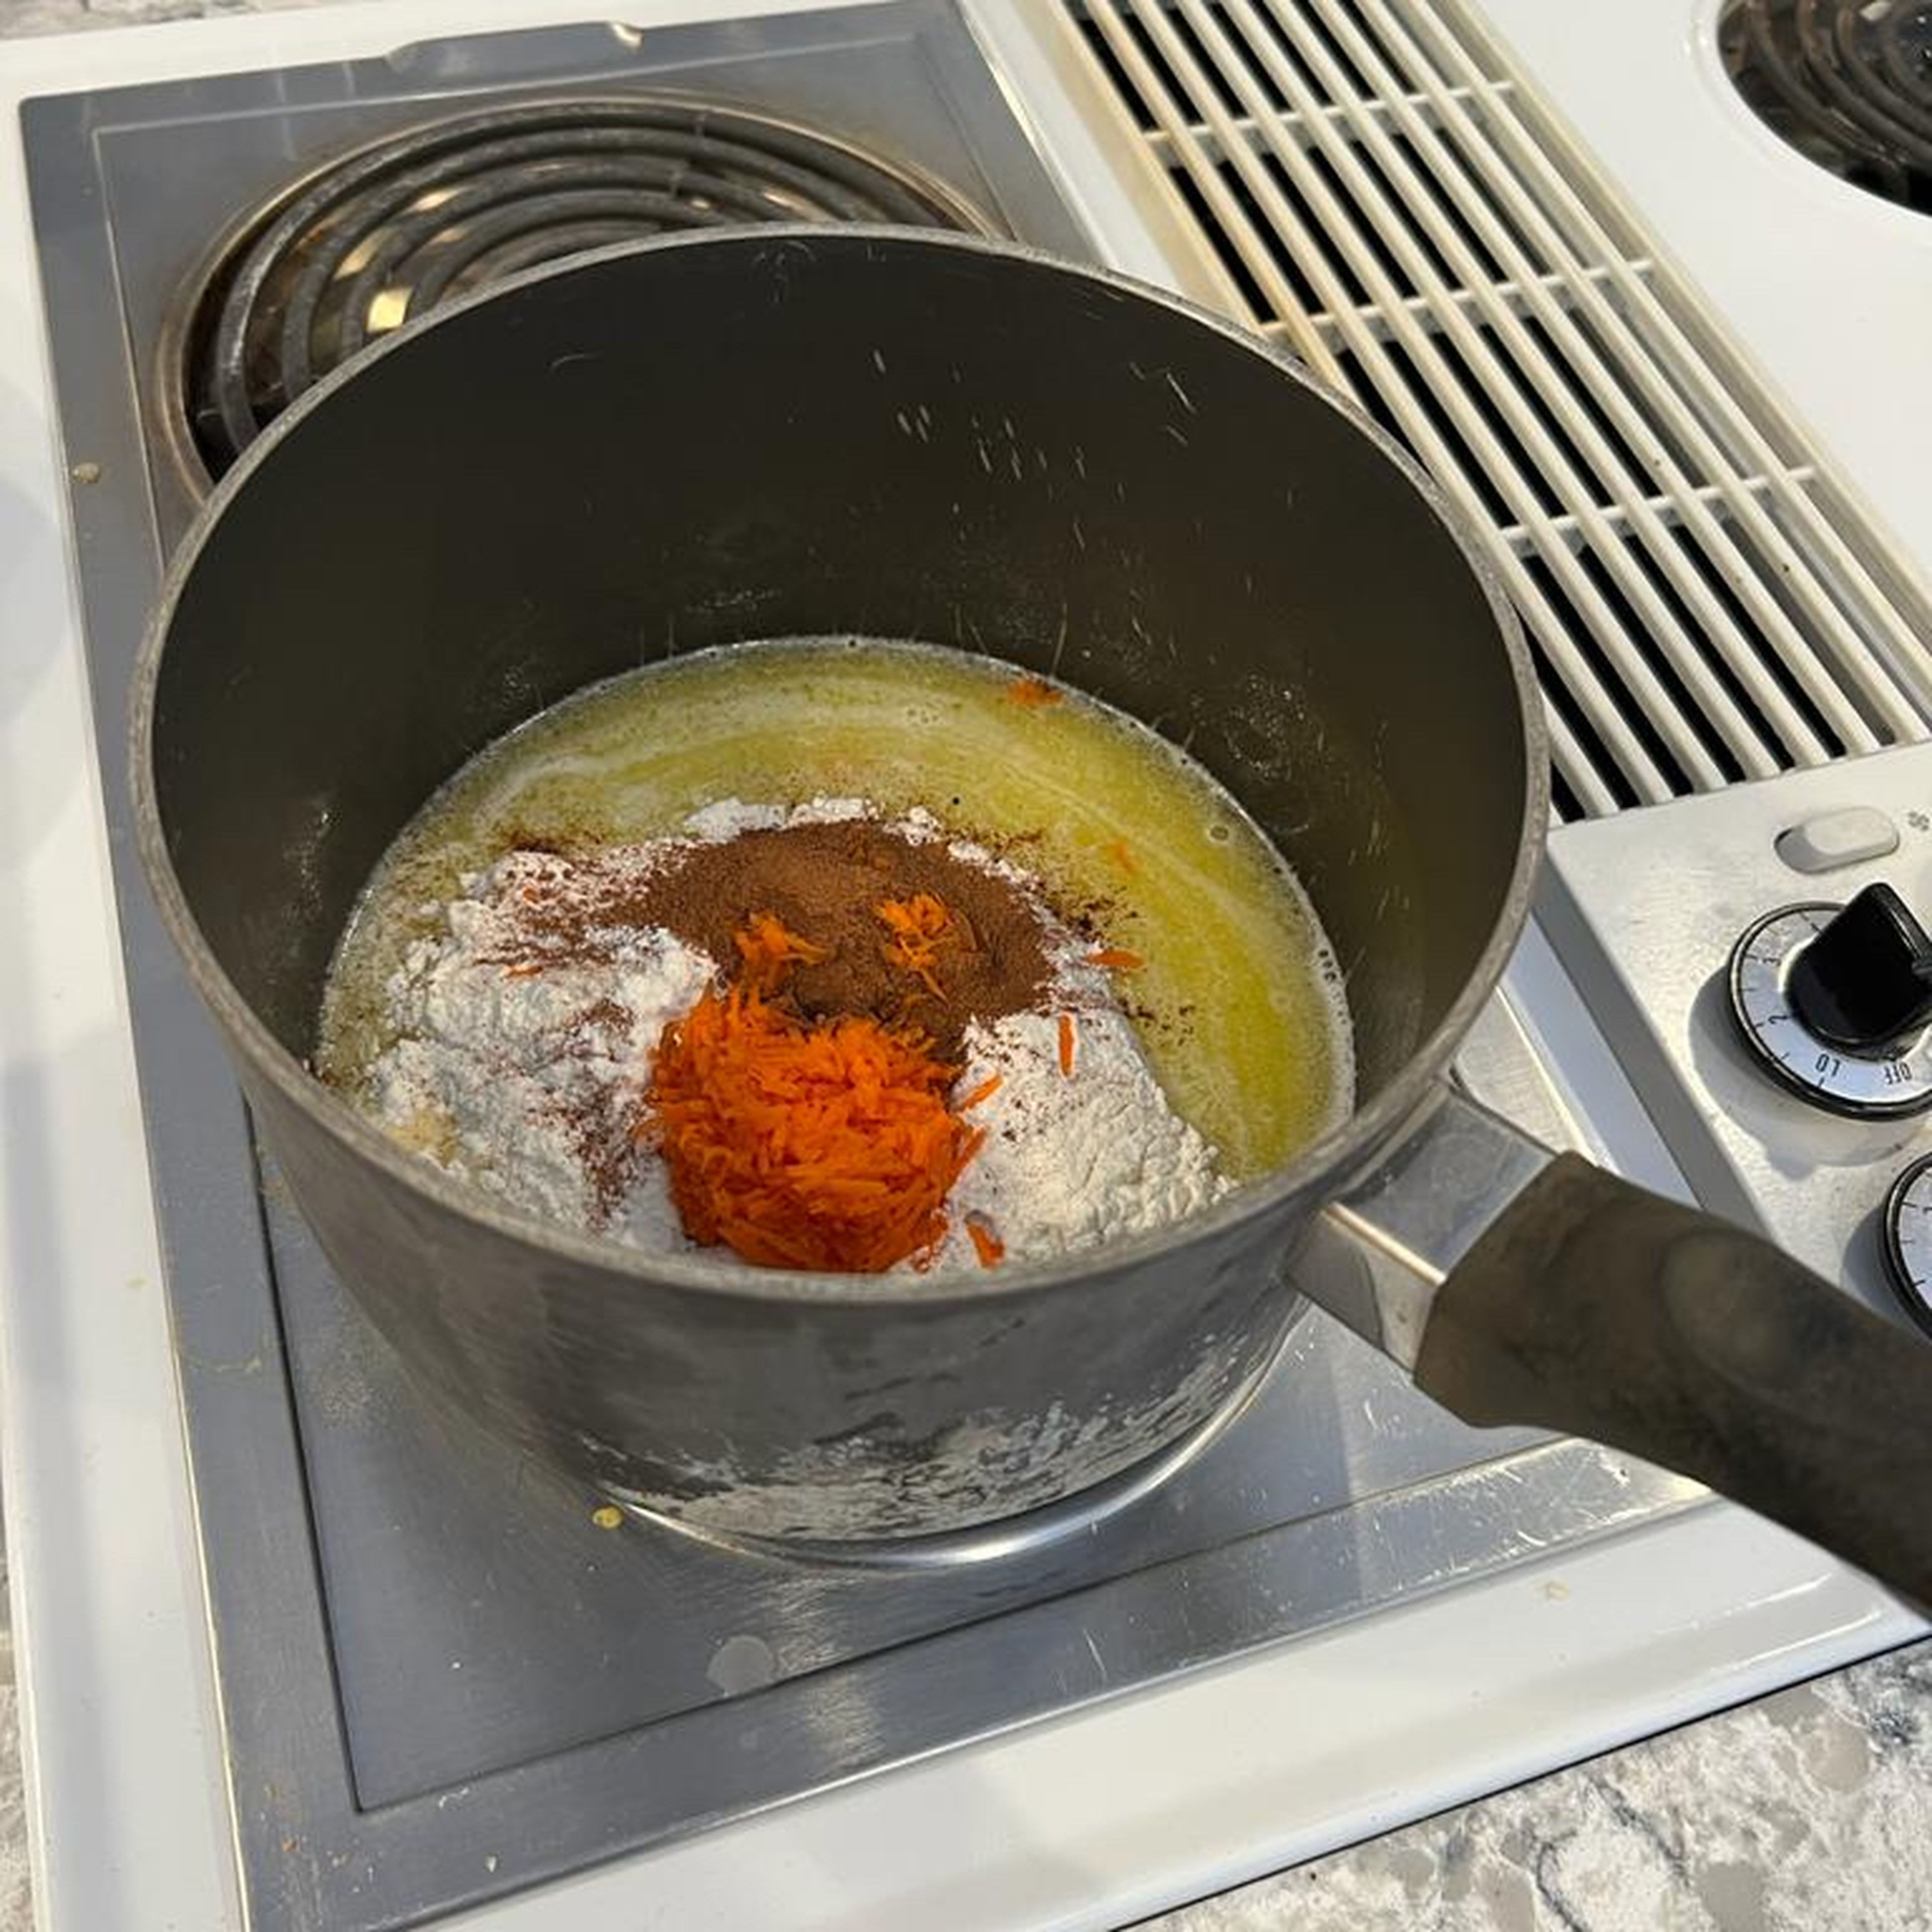 Take the pan off the heat and combine flour, your spices, and carrots into the pan mixture. Put back on the heat and cook for 1-3 more minutes while mixing constantly.